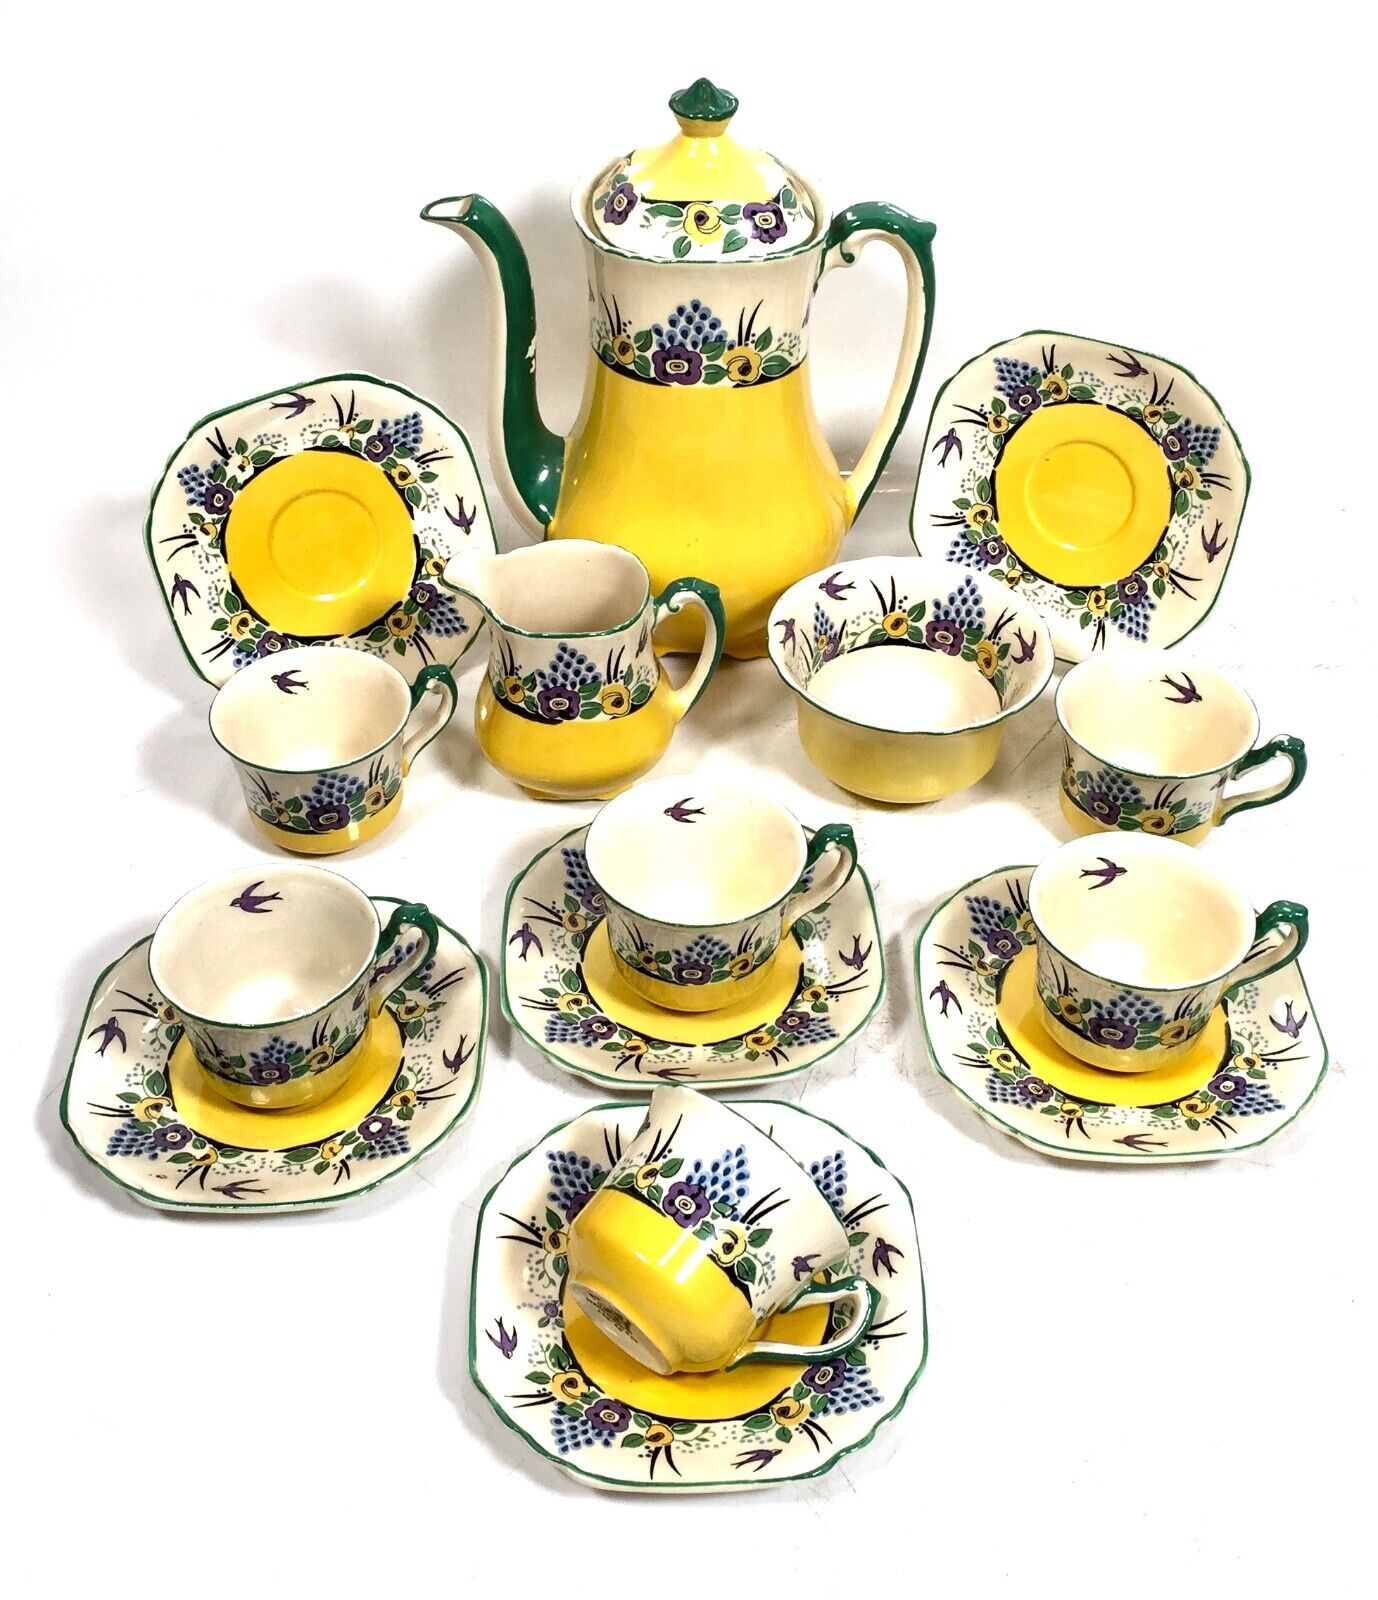 Antique Edwardian Early Wedgwood Coffee Tea Set for 6 People / Swallow Pattern